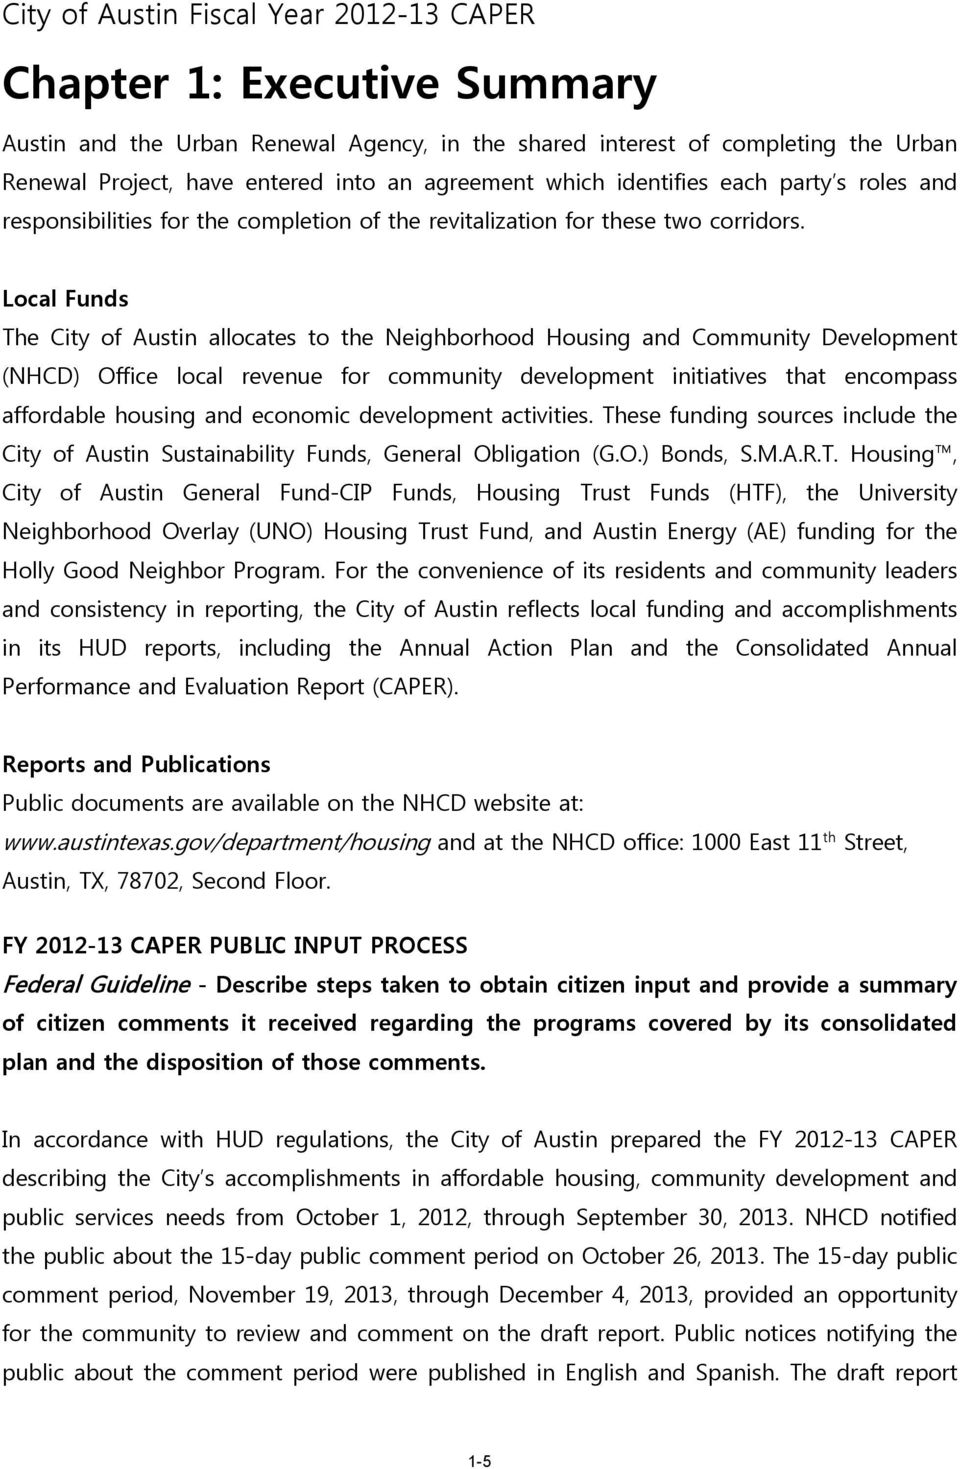 Local Funds The City of Austin allocates to the Neighborhood Housing and Community Development (NHCD) Office local revenue for community development initiatives that encompass affordable housing and